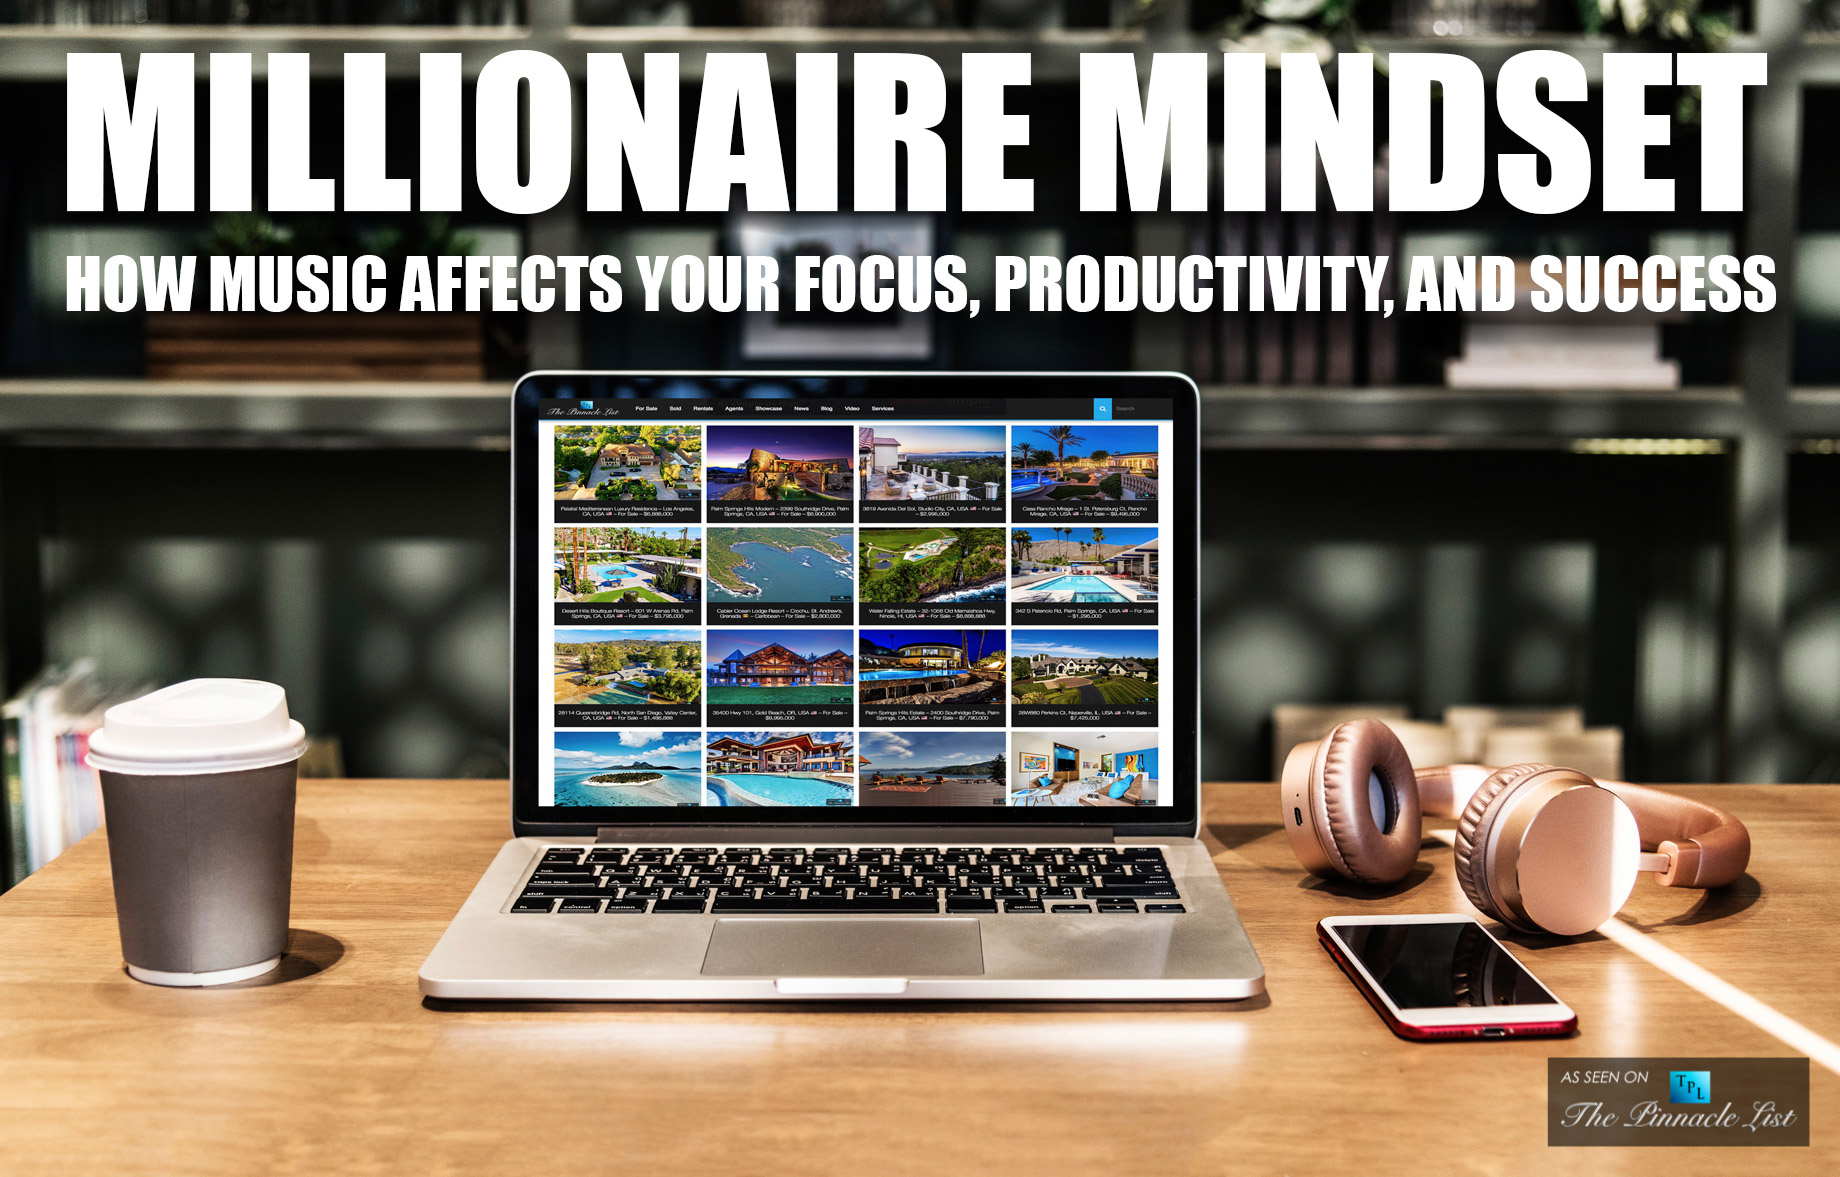 Millionaire Mindset - How Music Affects Your Focus, Productivity, and Success